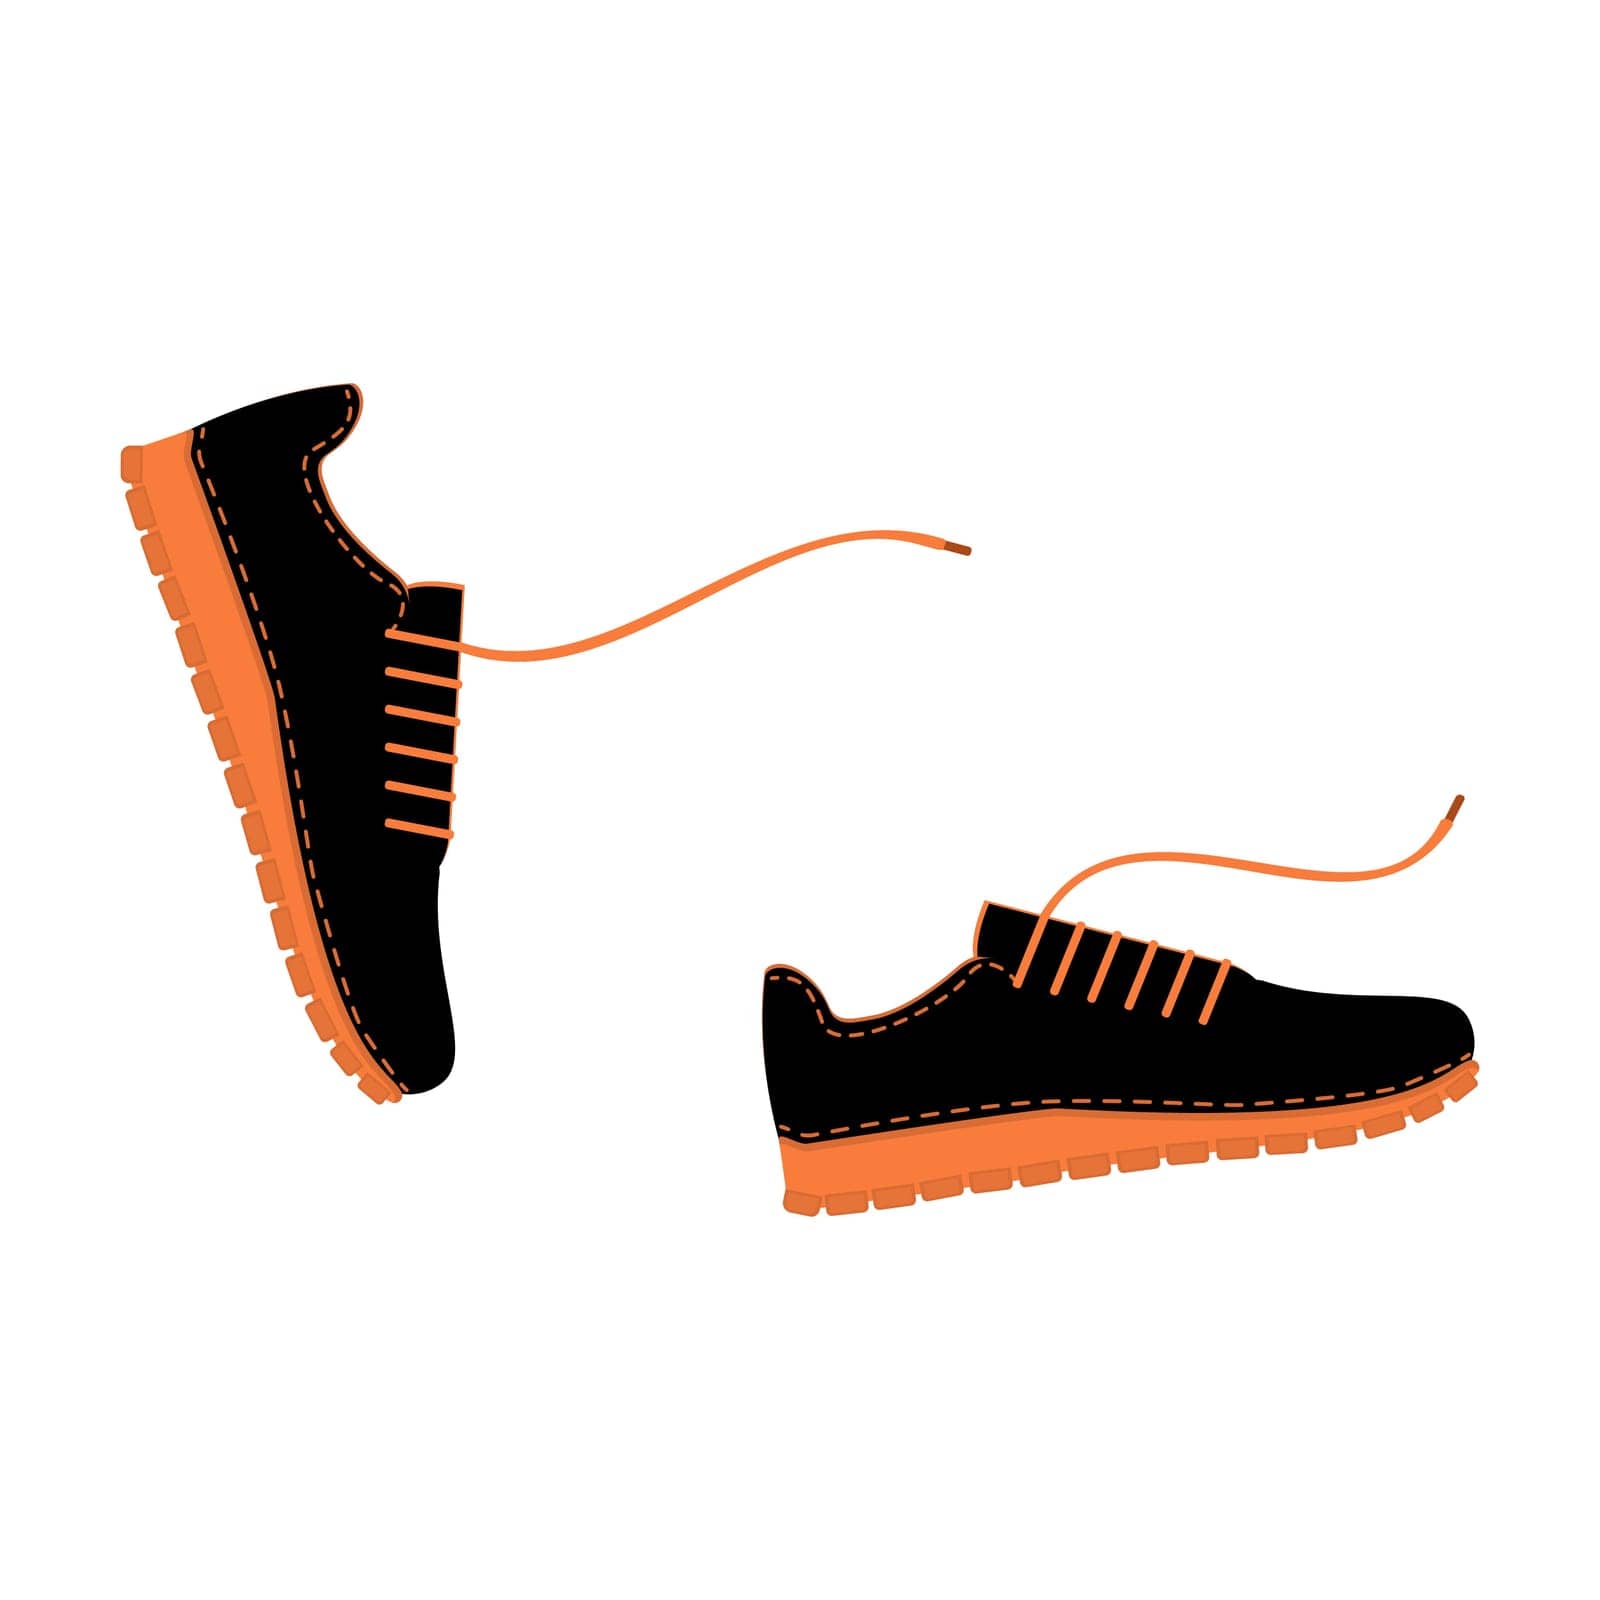 Running, moving in sport shoes. Classic sneakers in flat style with laces. Sport footwear for men and women. by Simvolist